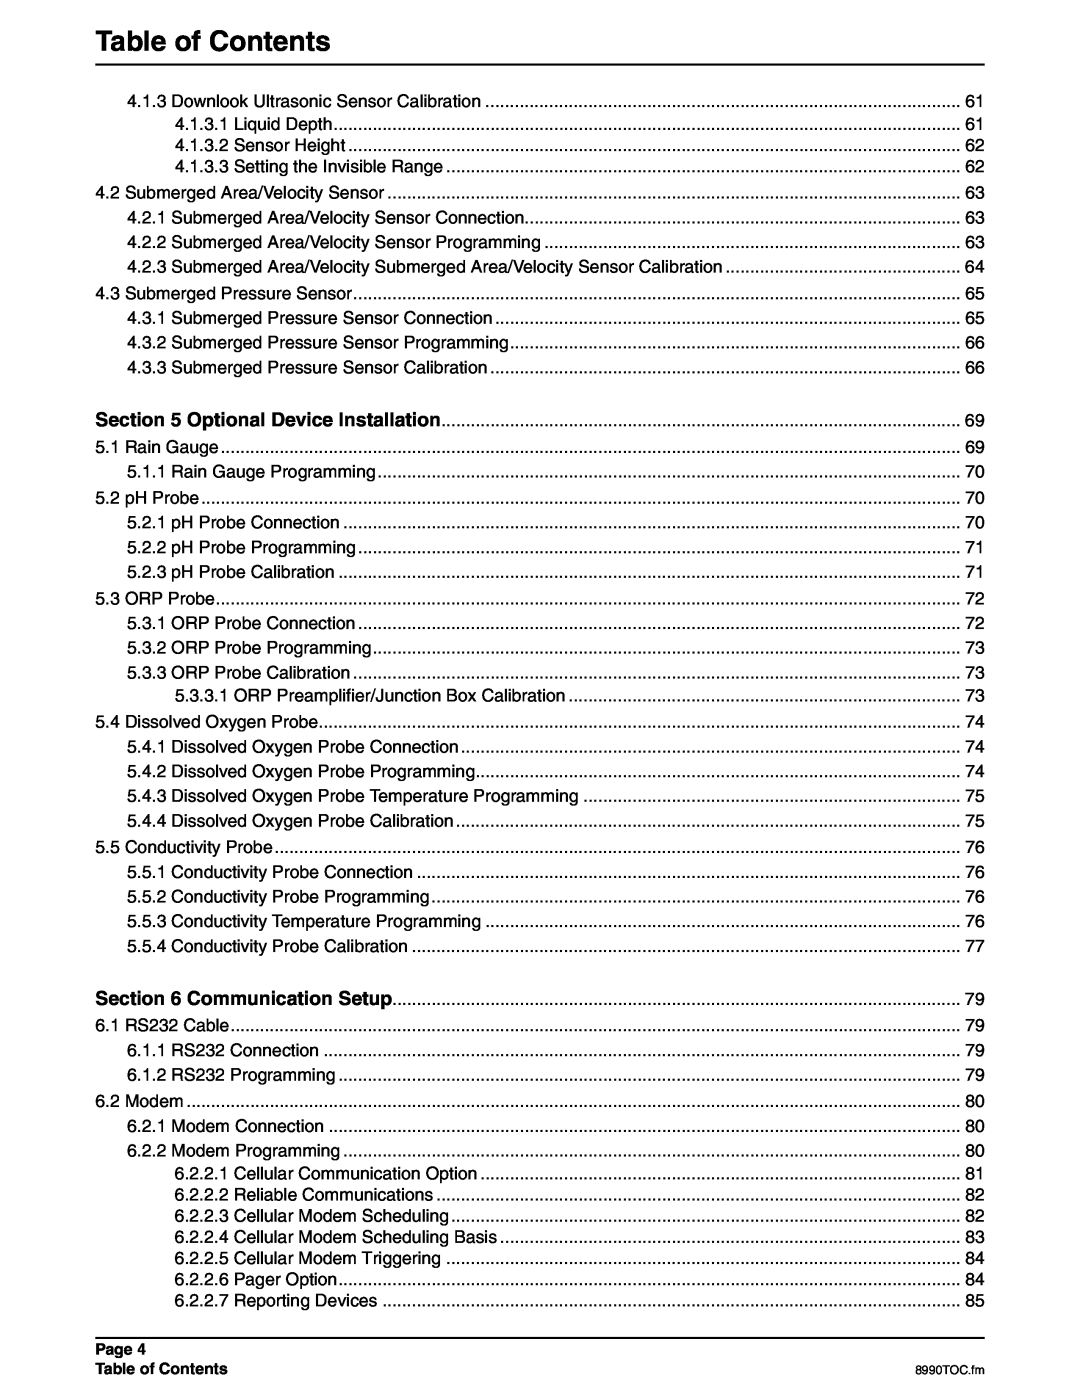 Hach 900 MAX manual Table of Contents 